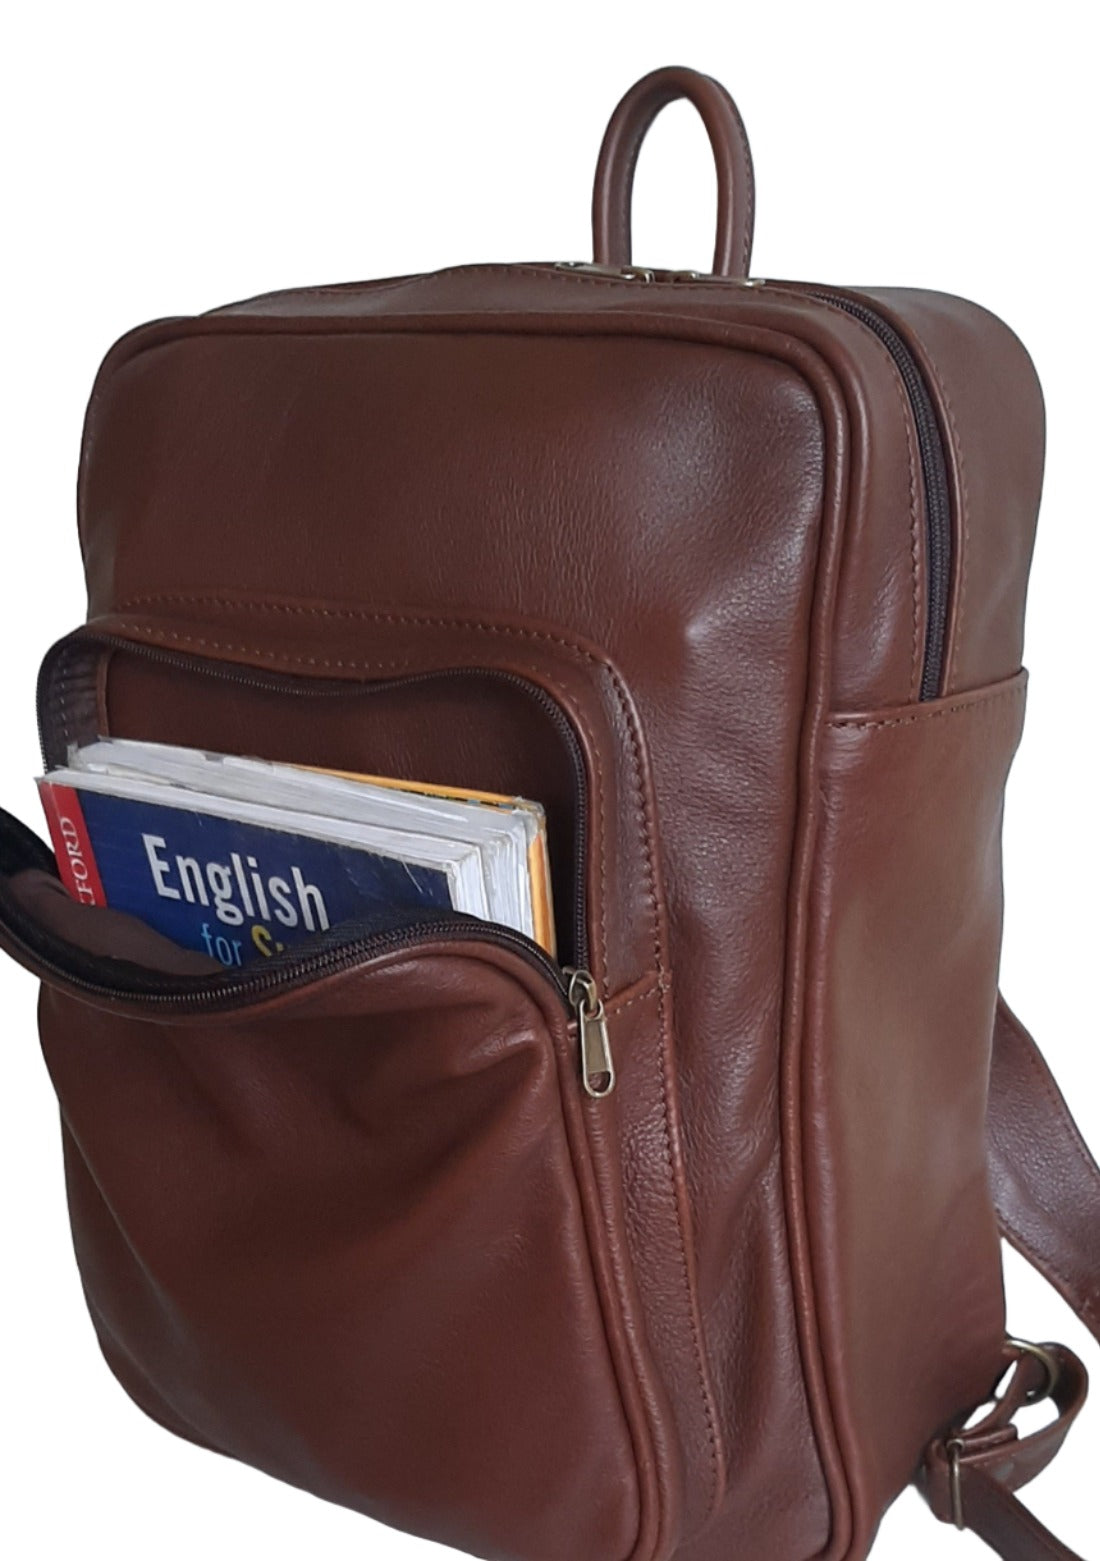 A beautiful genuine leather backpack with A4 size books in the front pocket , designed and made by Cape Masai leather 